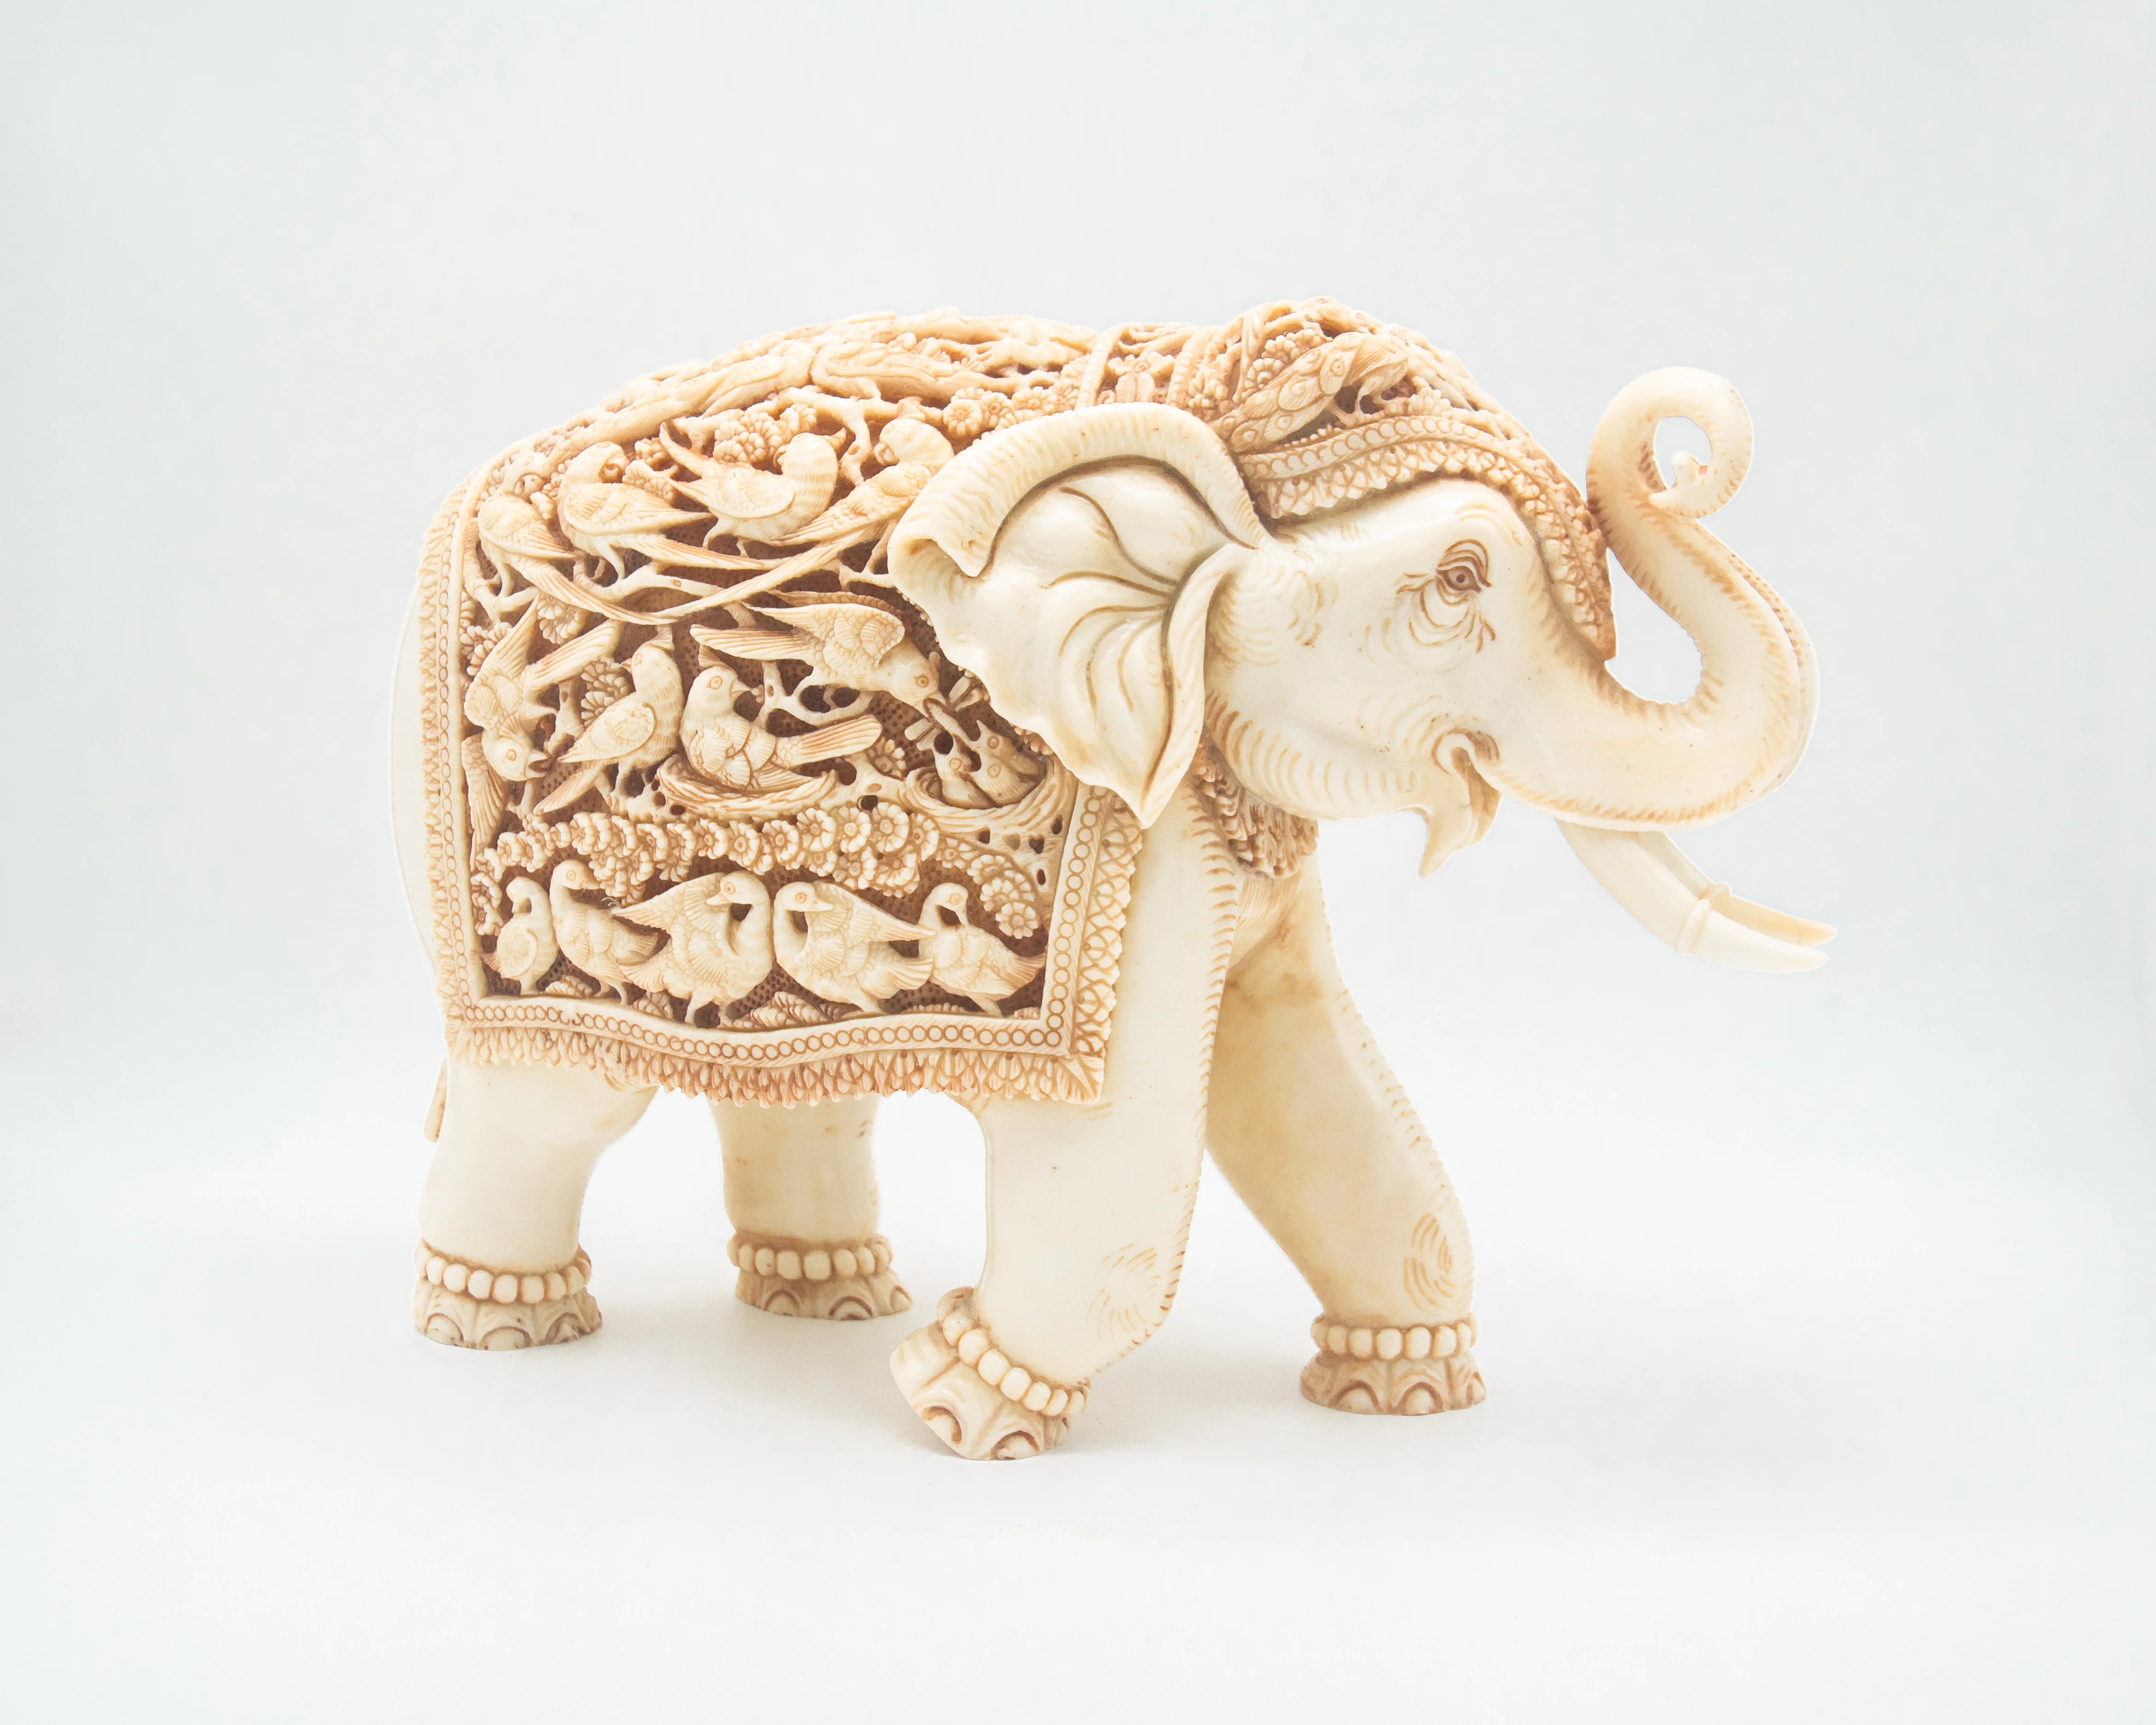 Hand Carved Resin Elephant Sculpture | Decorative Figurine For Gift